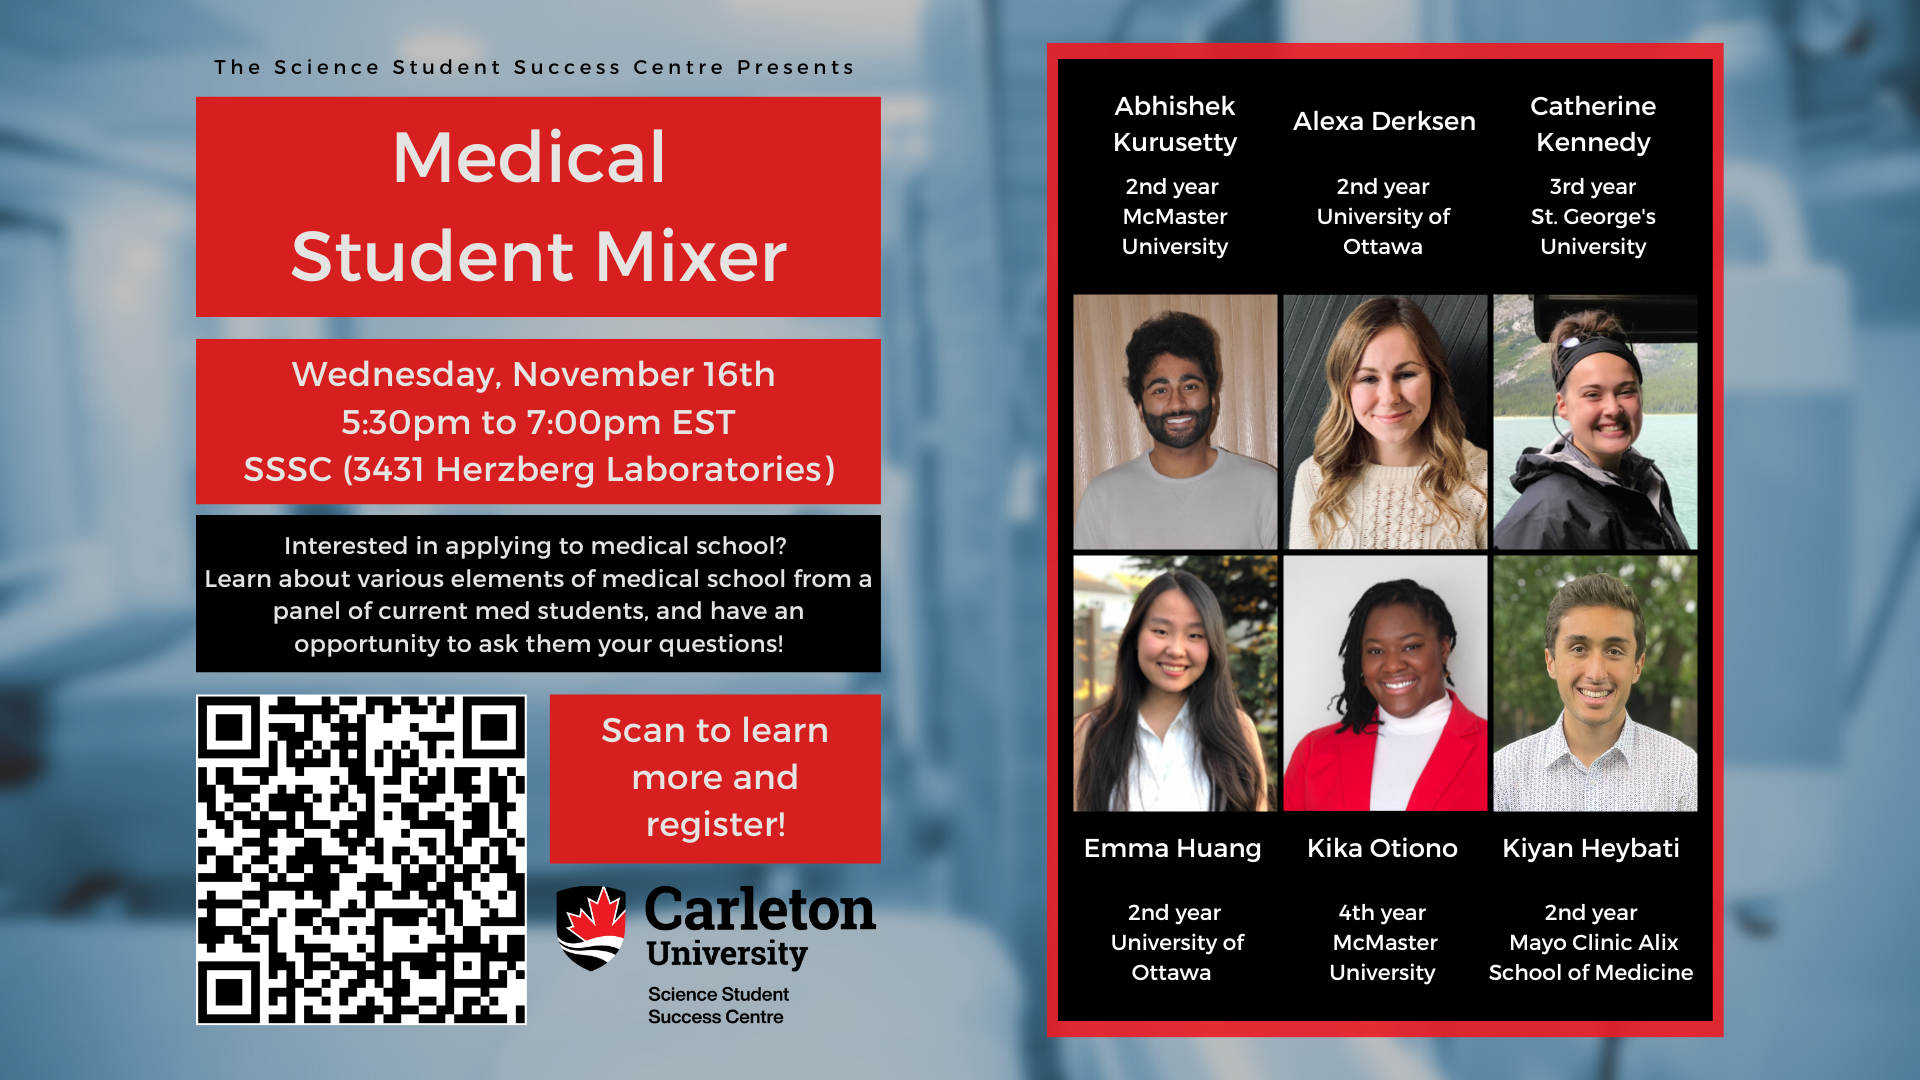 Poster with text. The text reads “The Science Student Success Centre Presents Medical School Mixer. Wednesday, November 16th, 5:30pm to 7:00pm EST. SSSC (3431 Herzberg Laboratories). Interested in applying to medical school? Learn about various elements of medical school from a panel of current med students, and have an opportunity to ask them your questions! Scan to learn more and register. Carleton University Science Student Success Centre. Abhishek Kurusetty, 2nd year McMaster University. Alexa Derksen, 2nd year University of Ottawa. Catherine Kennedy, 3rd year St. George's University. Emma Huang, 2nd year Universtiy of Ottawa. Kika Otiono, 4th year McMaster University. Kiyan Heybati, 2nd year Mayo Clinic Alix School of Medicine."